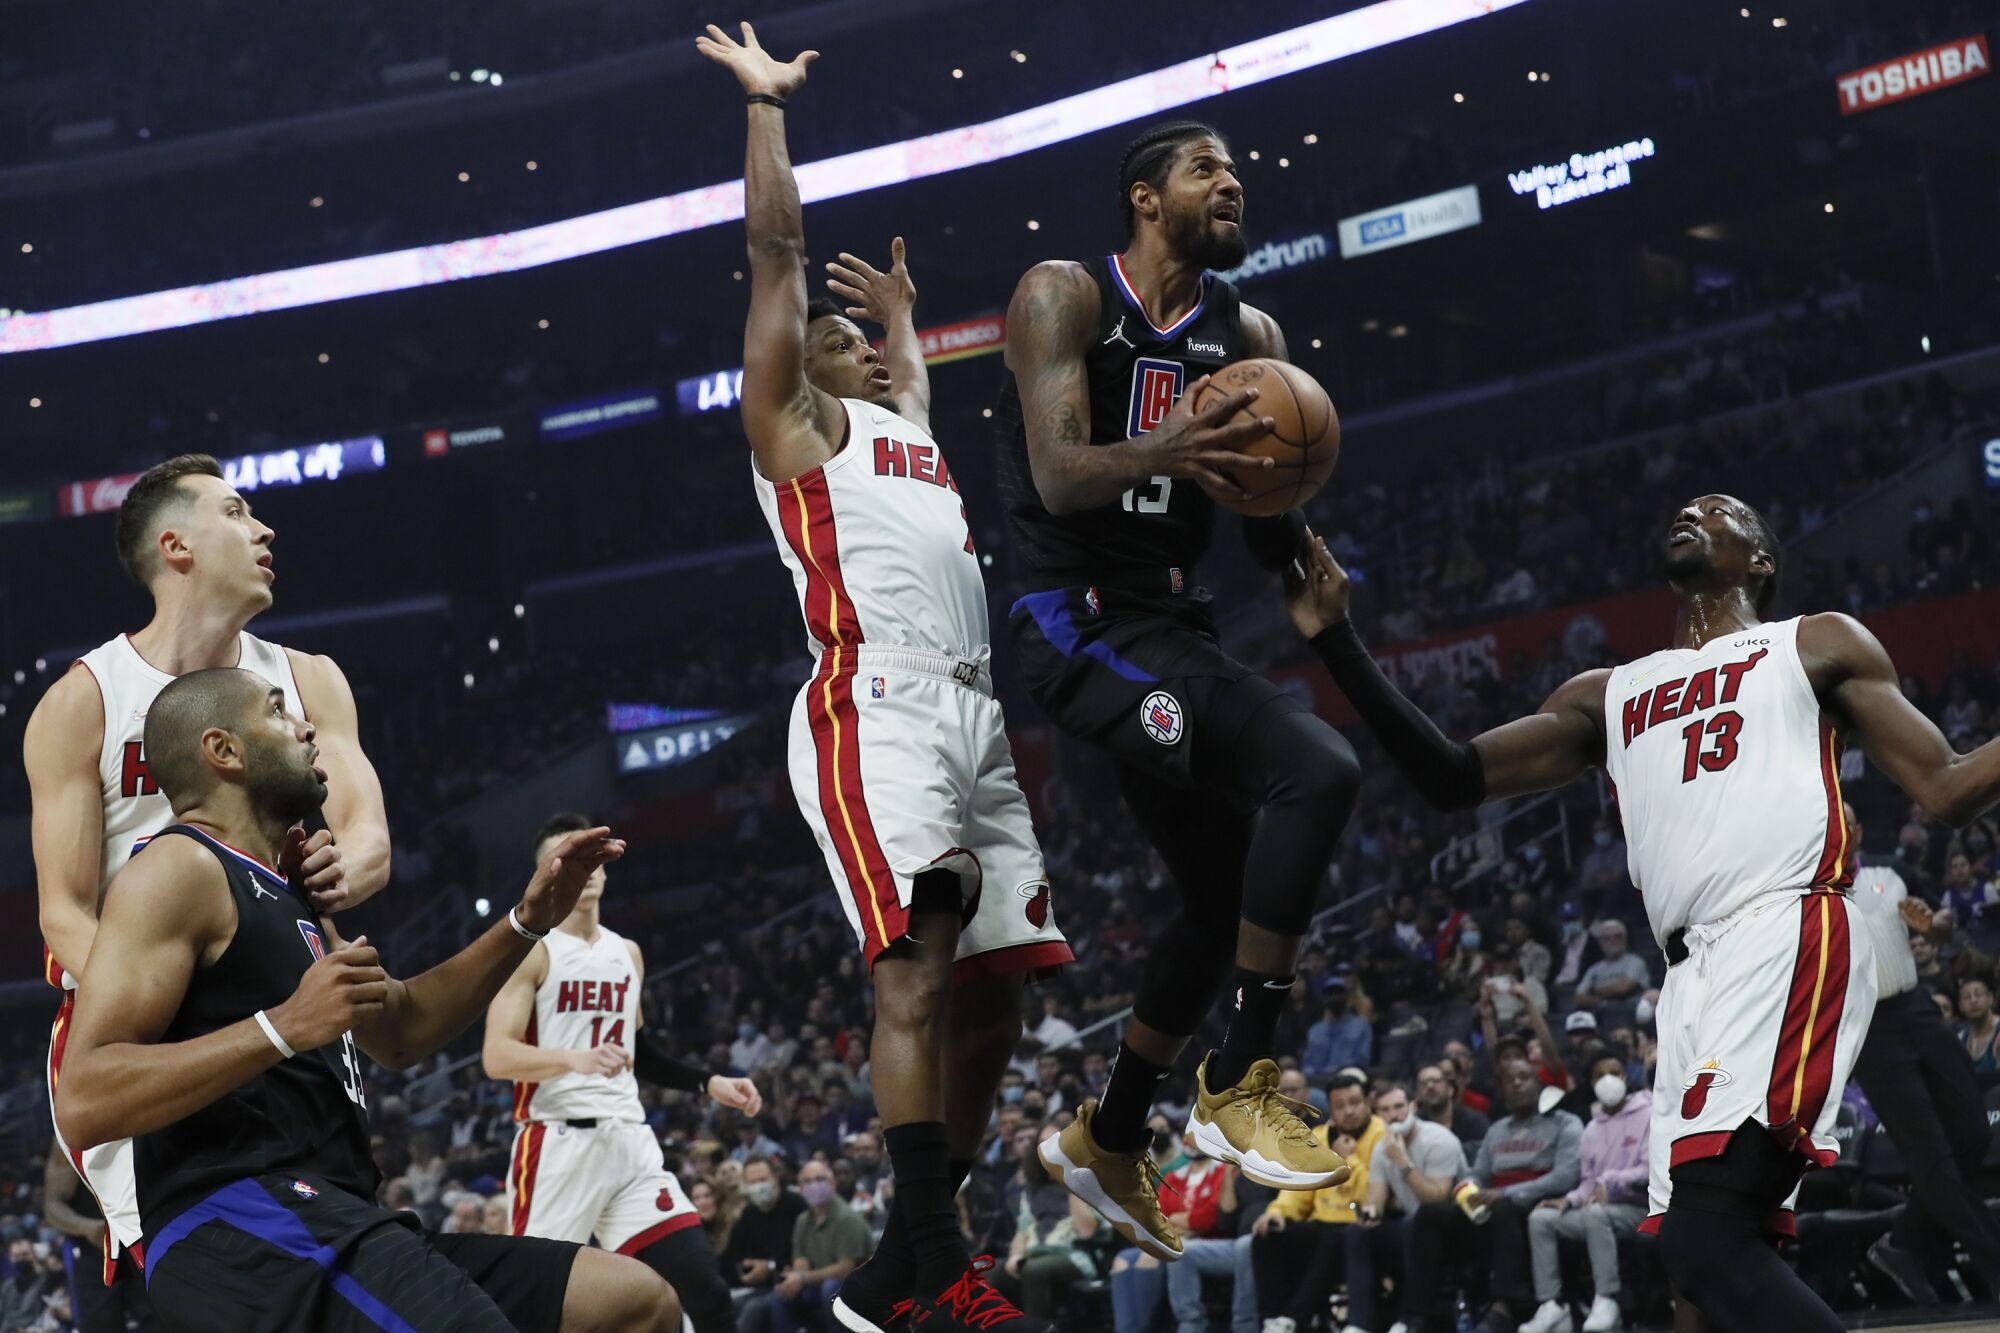 Clippers forward Paul George drive for a layup against the Heat.